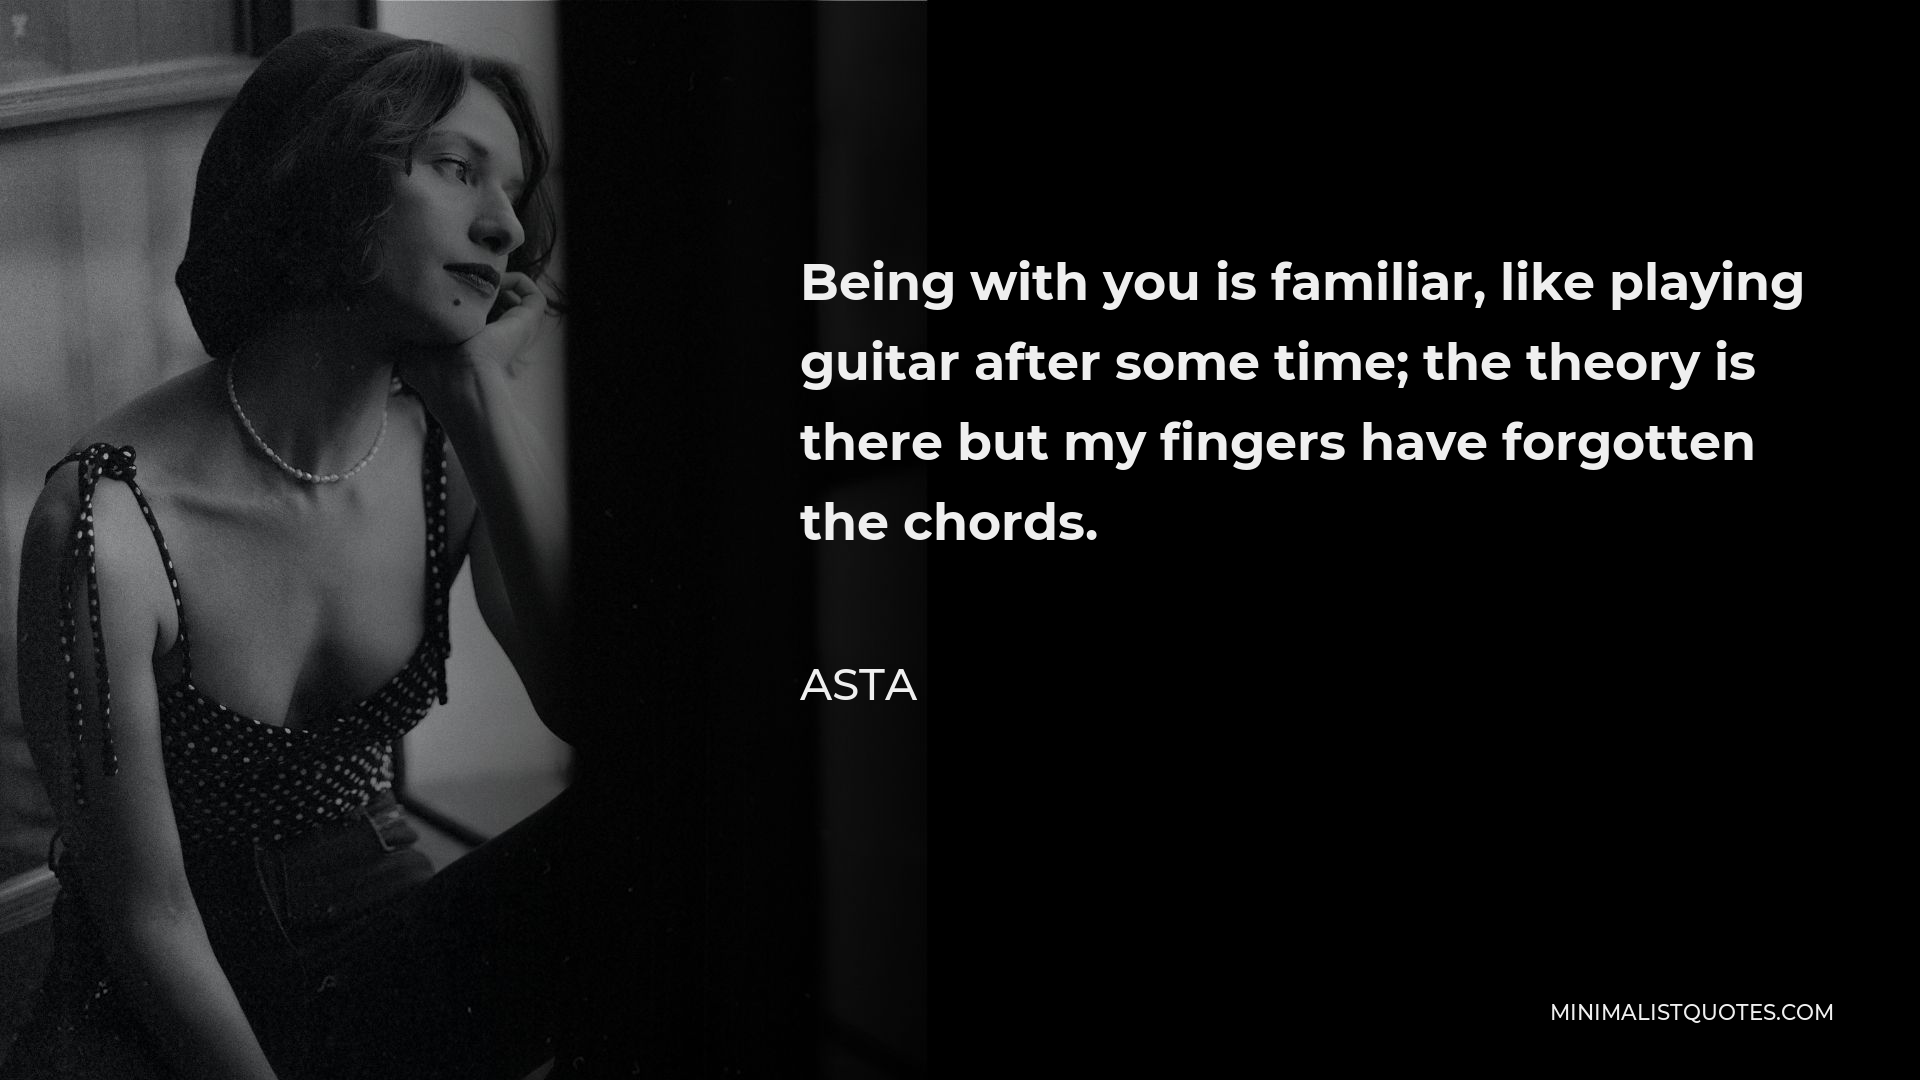 Asta Quote - Being with you is familiar, like playing guitar after some time; the theory is there but my fingers have forgotten the chords.